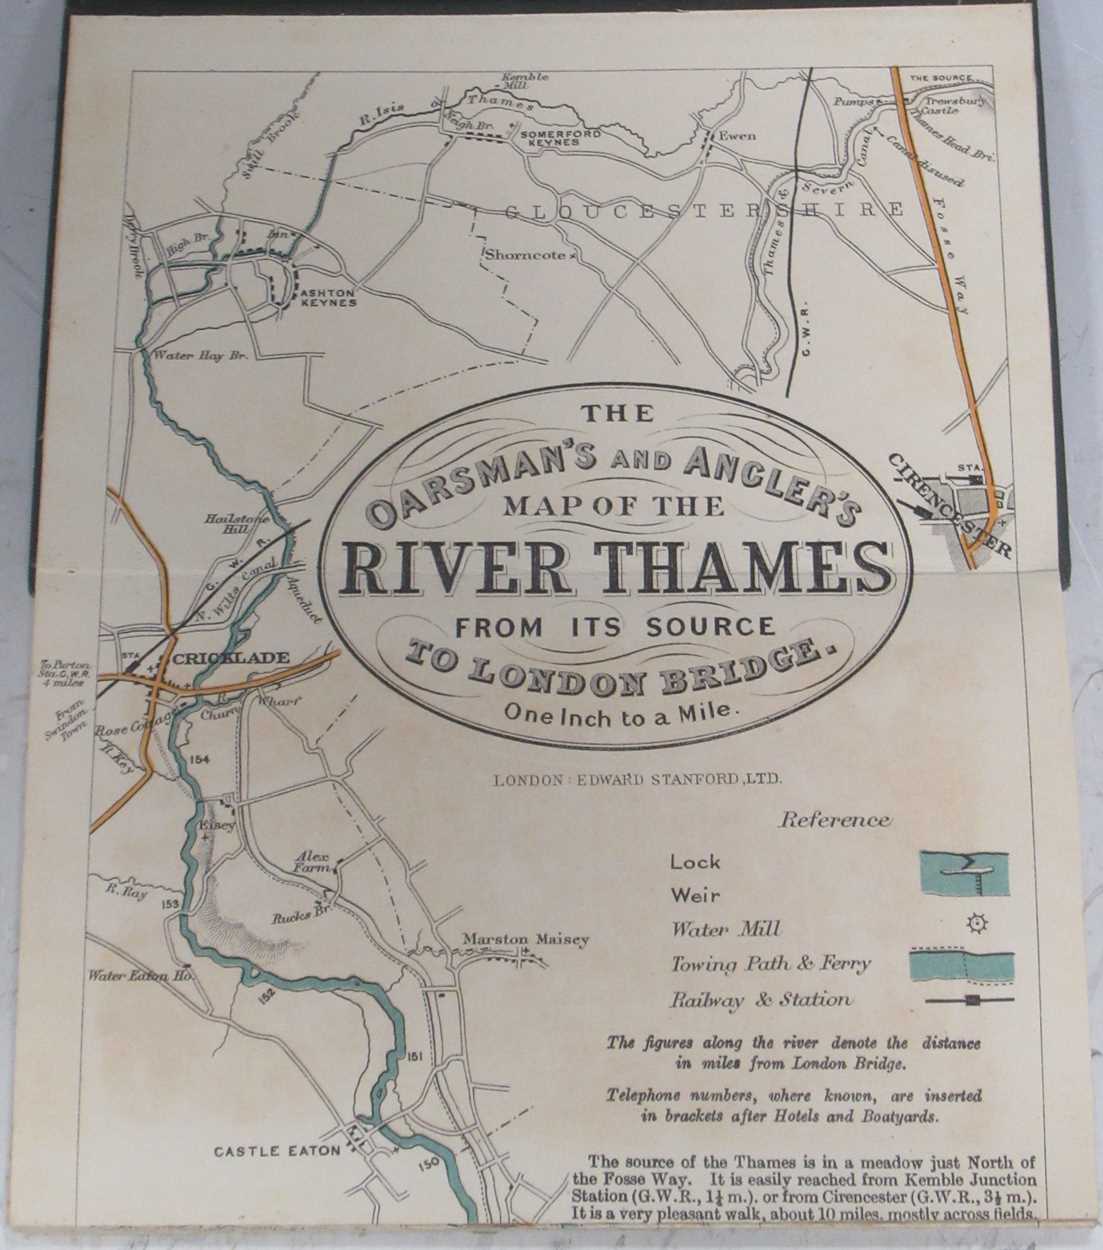 Stanford (Edward, publisher). The Oarsman's and Angler's Map of the River Thames from its Source